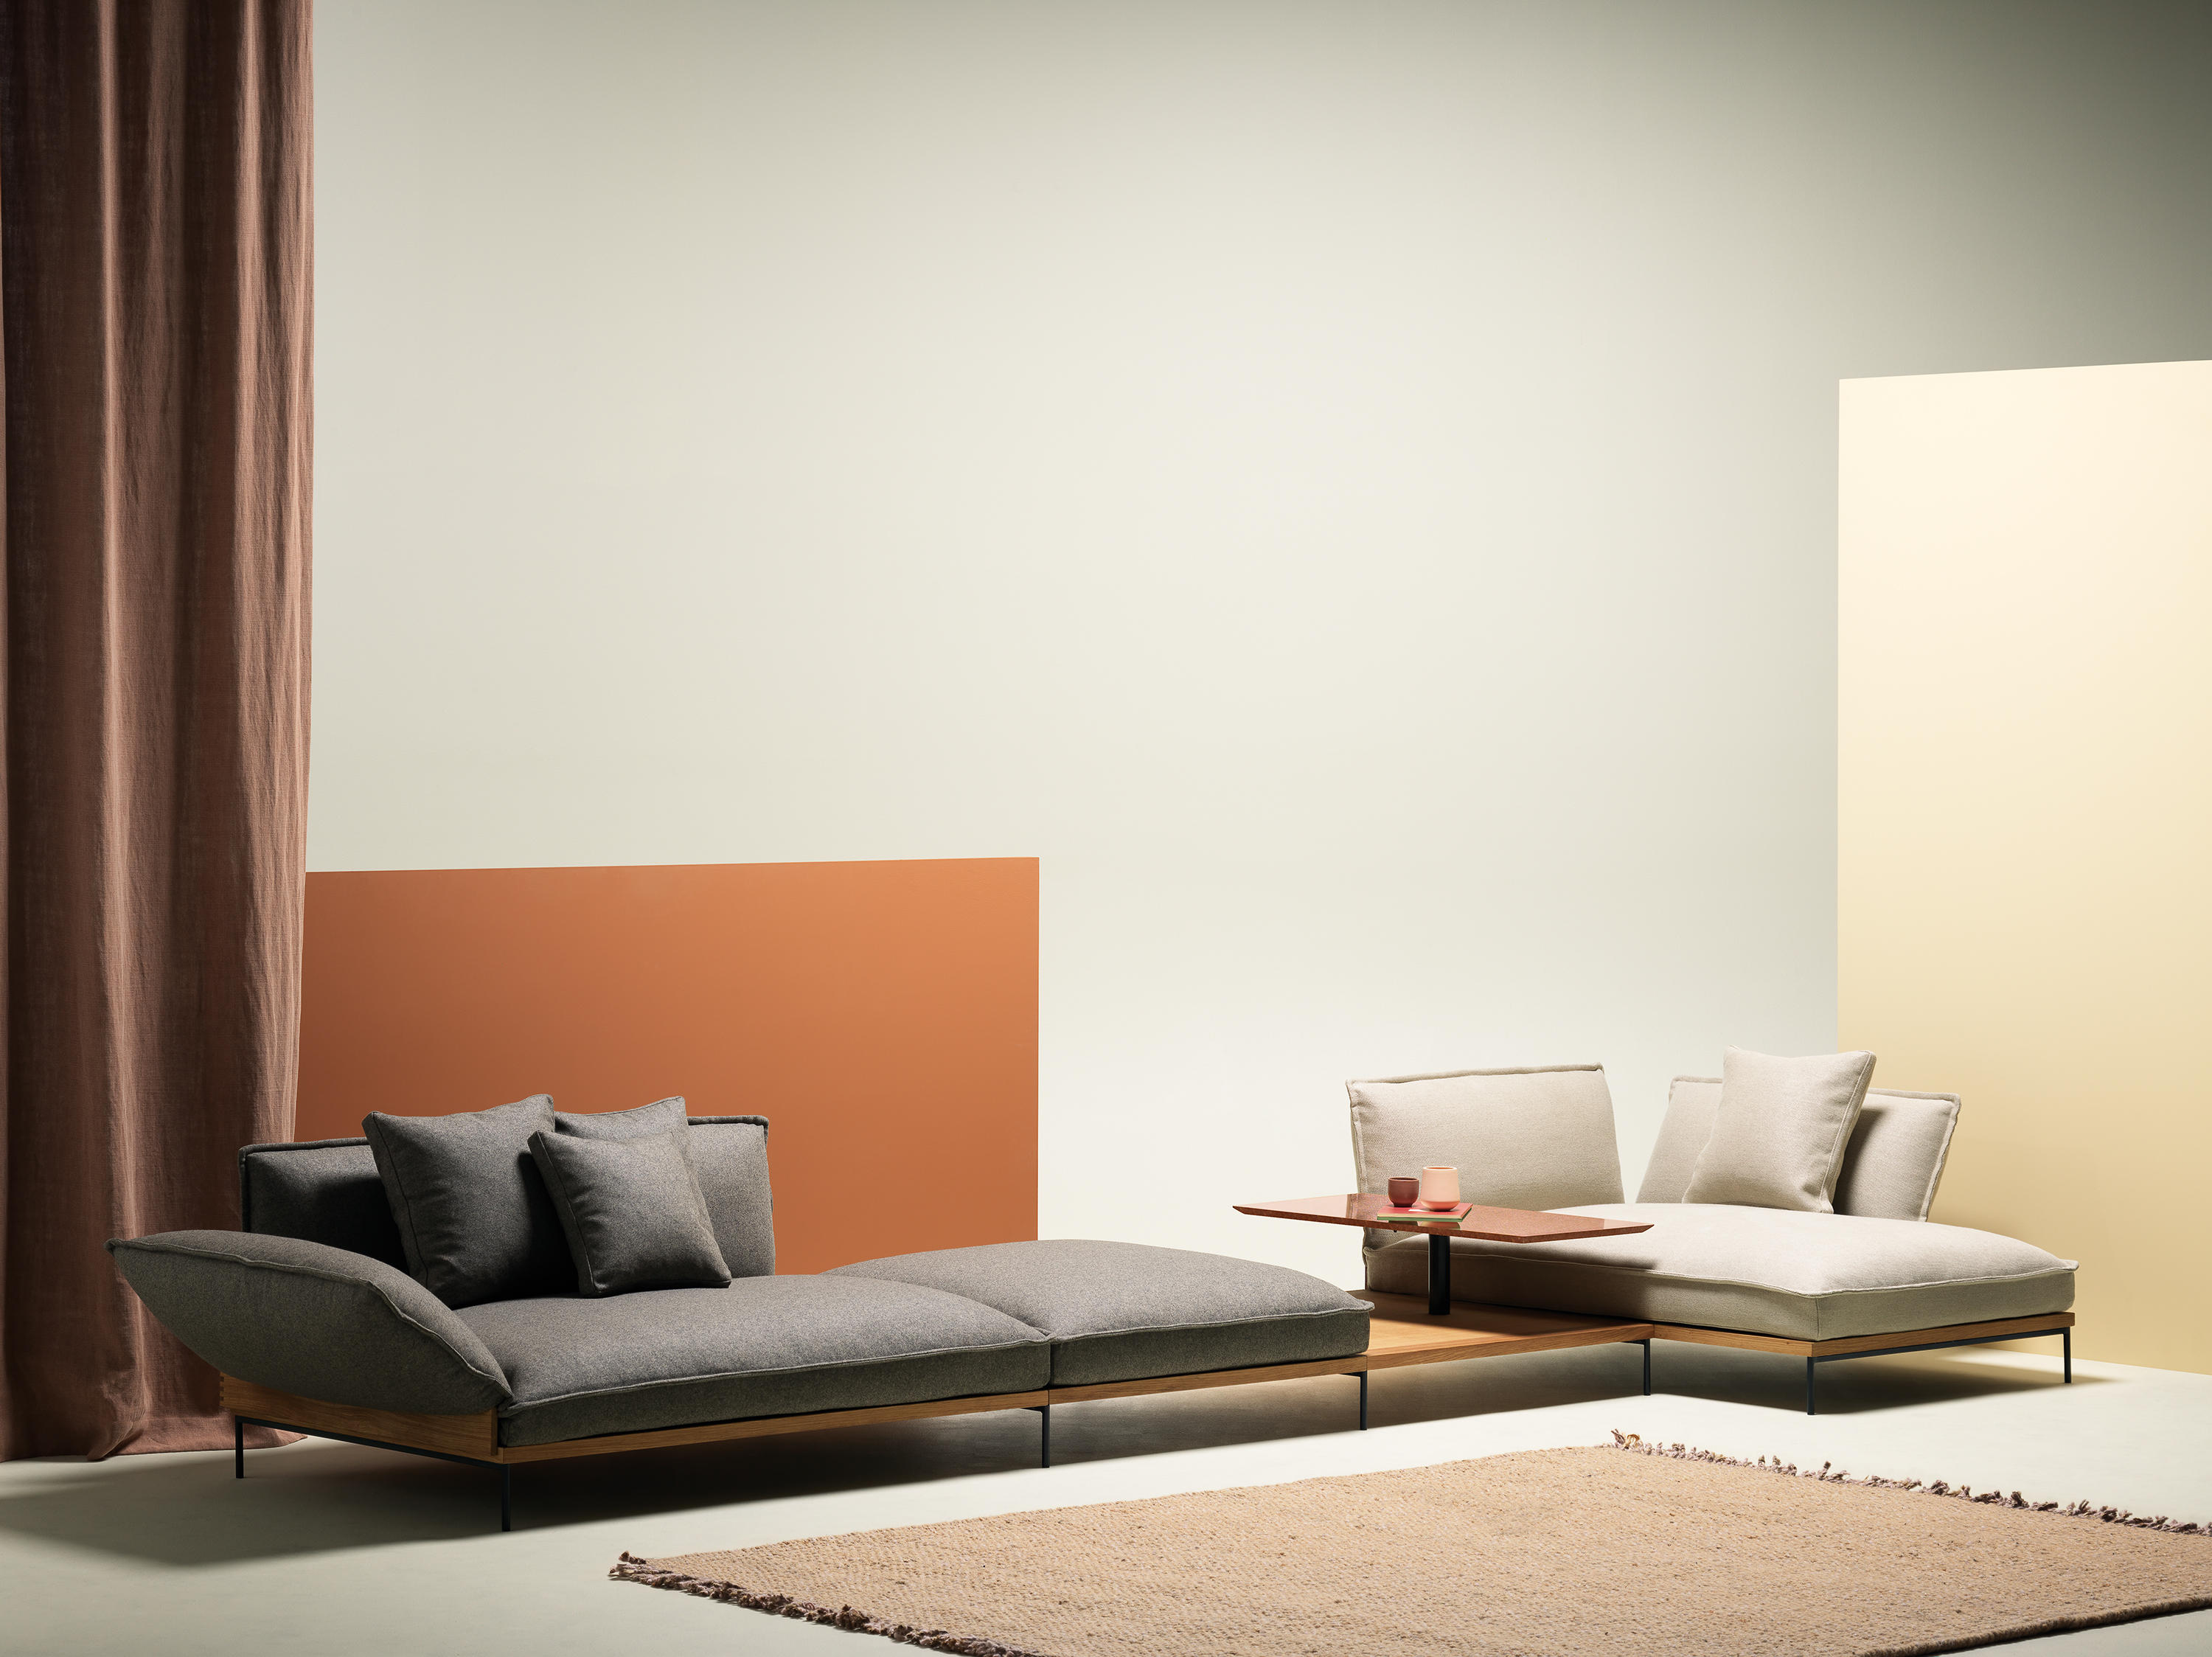 Jord Modular Sofa by Luca Nicetto for Fogia